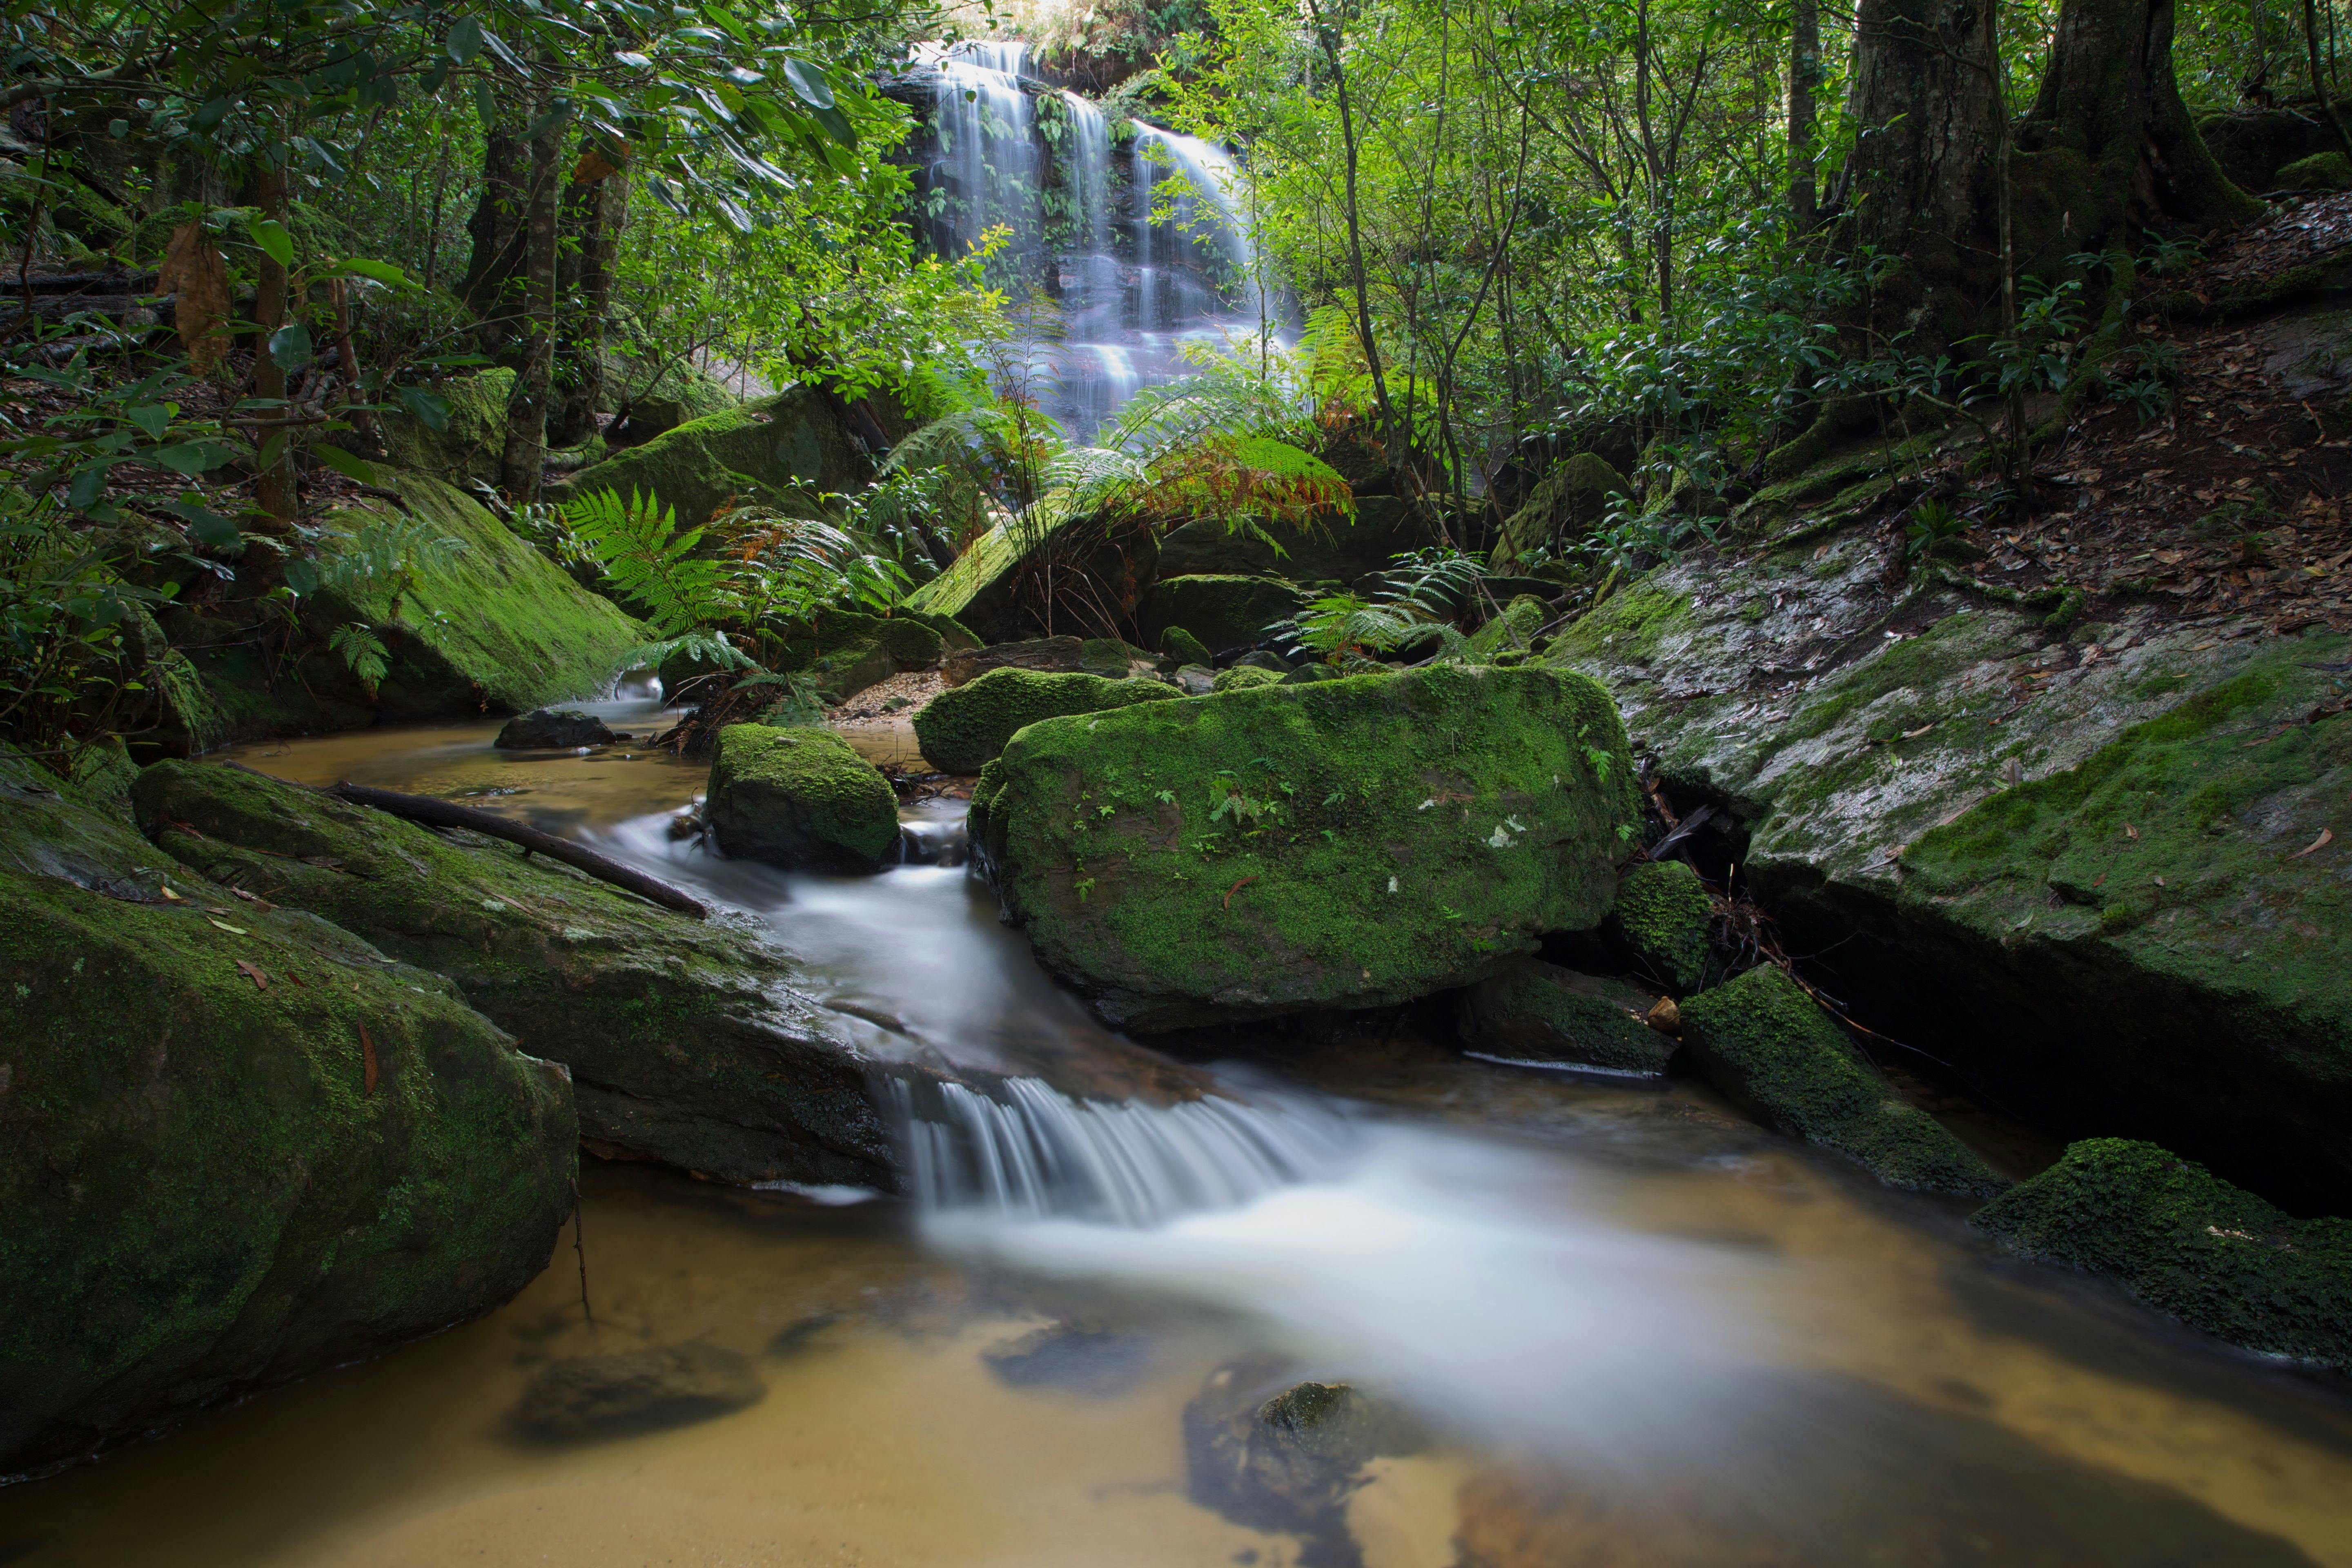 South Lawson Waterfall (Photo by David Noble)